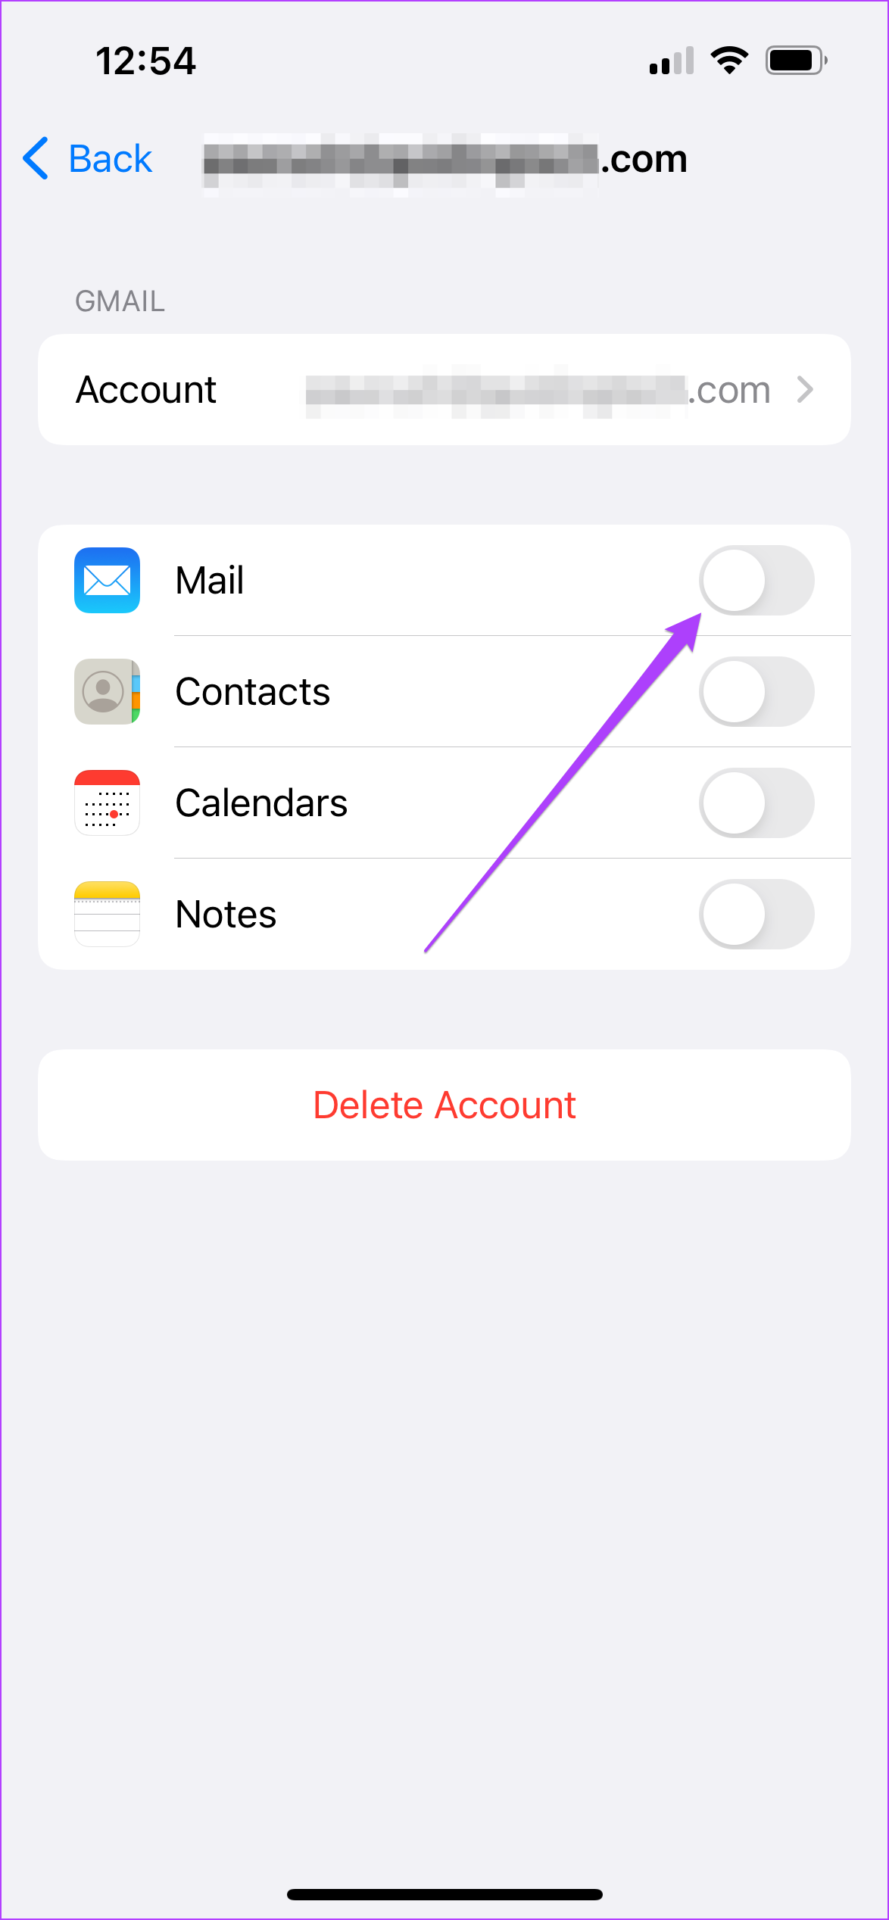 How To Troubleshoot IPhone Email Syncing Issues?